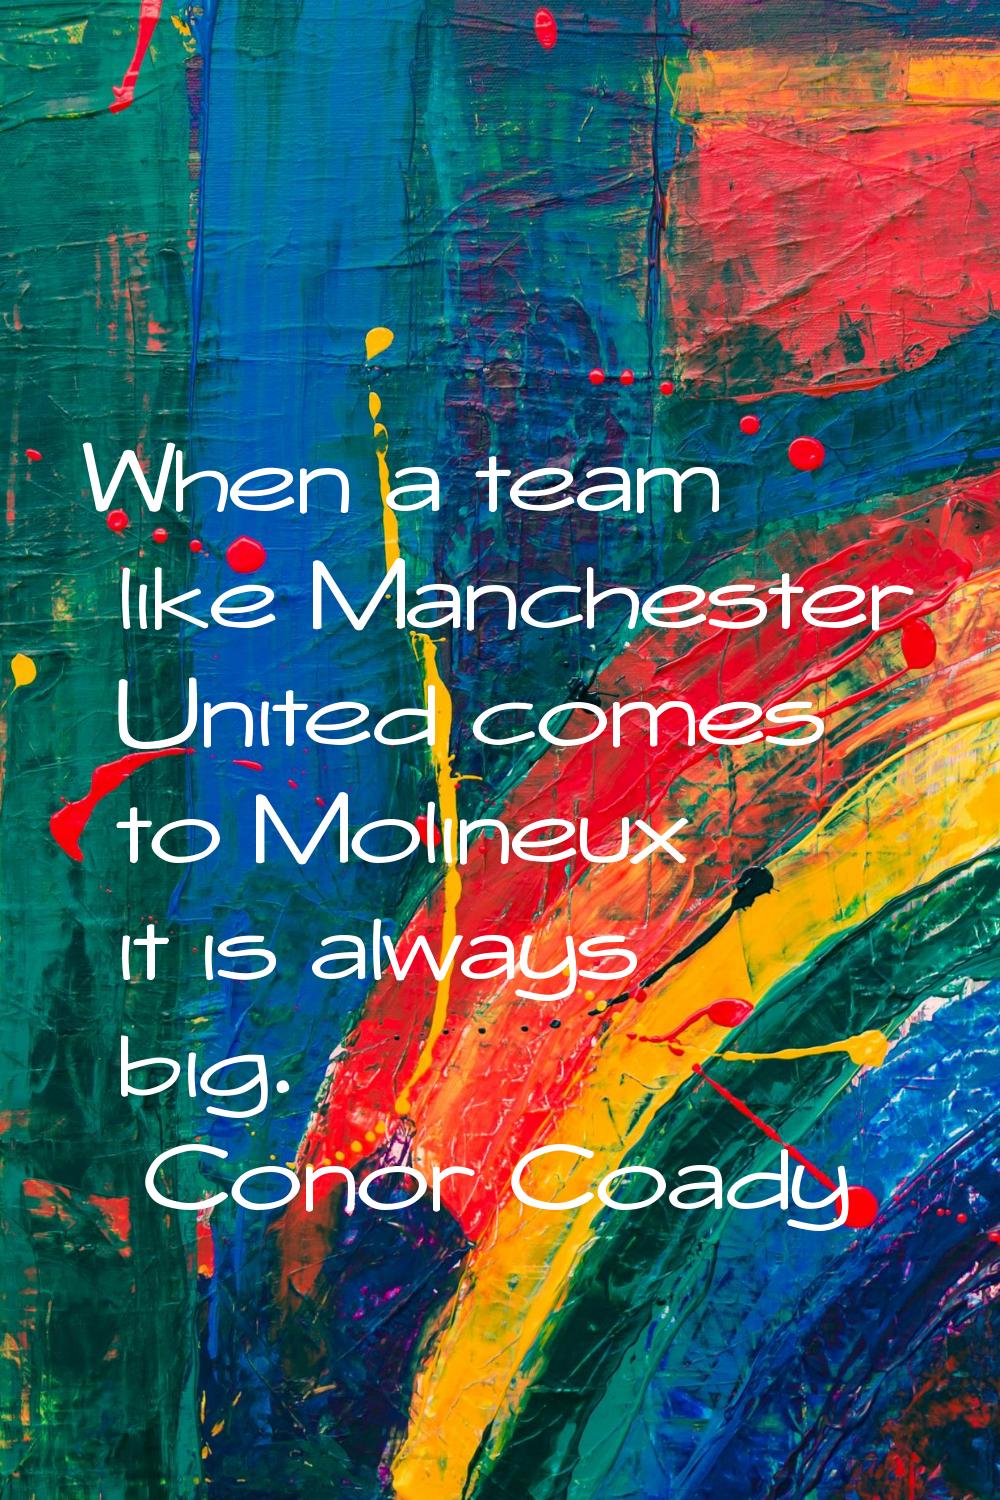 When a team like Manchester United comes to Molineux it is always big.